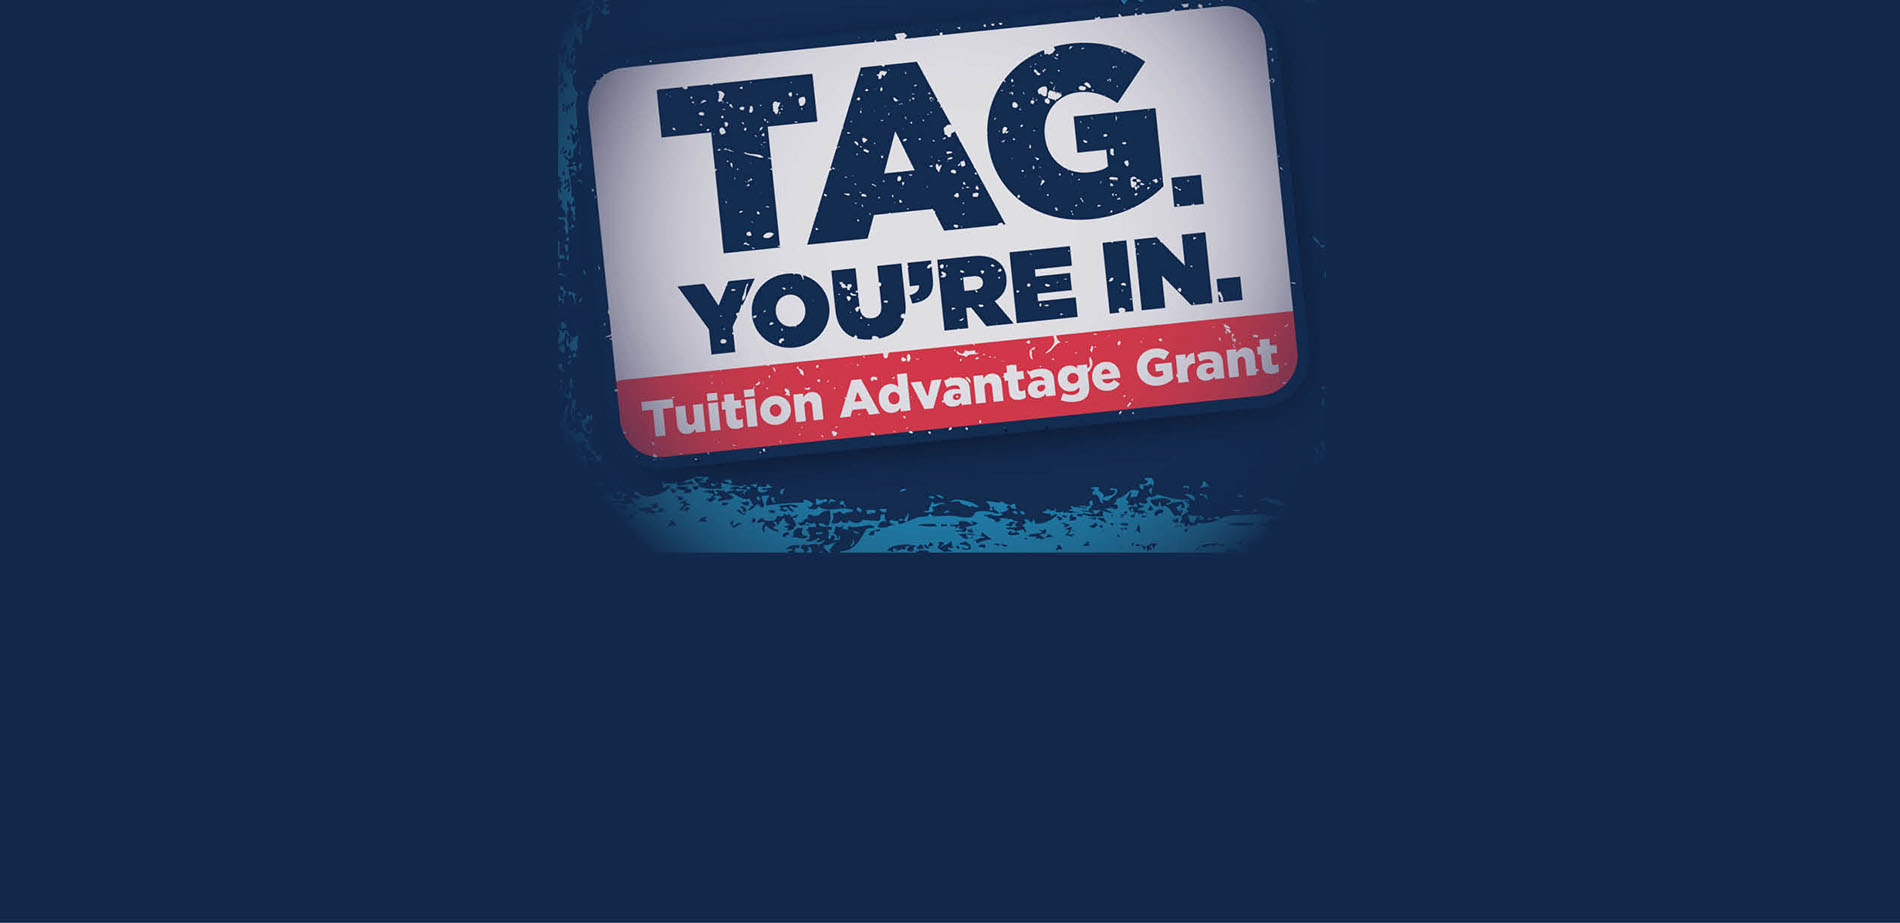 Red white and blue sticker reading TAG YOU'RE IN - Tuition Advantage Grant